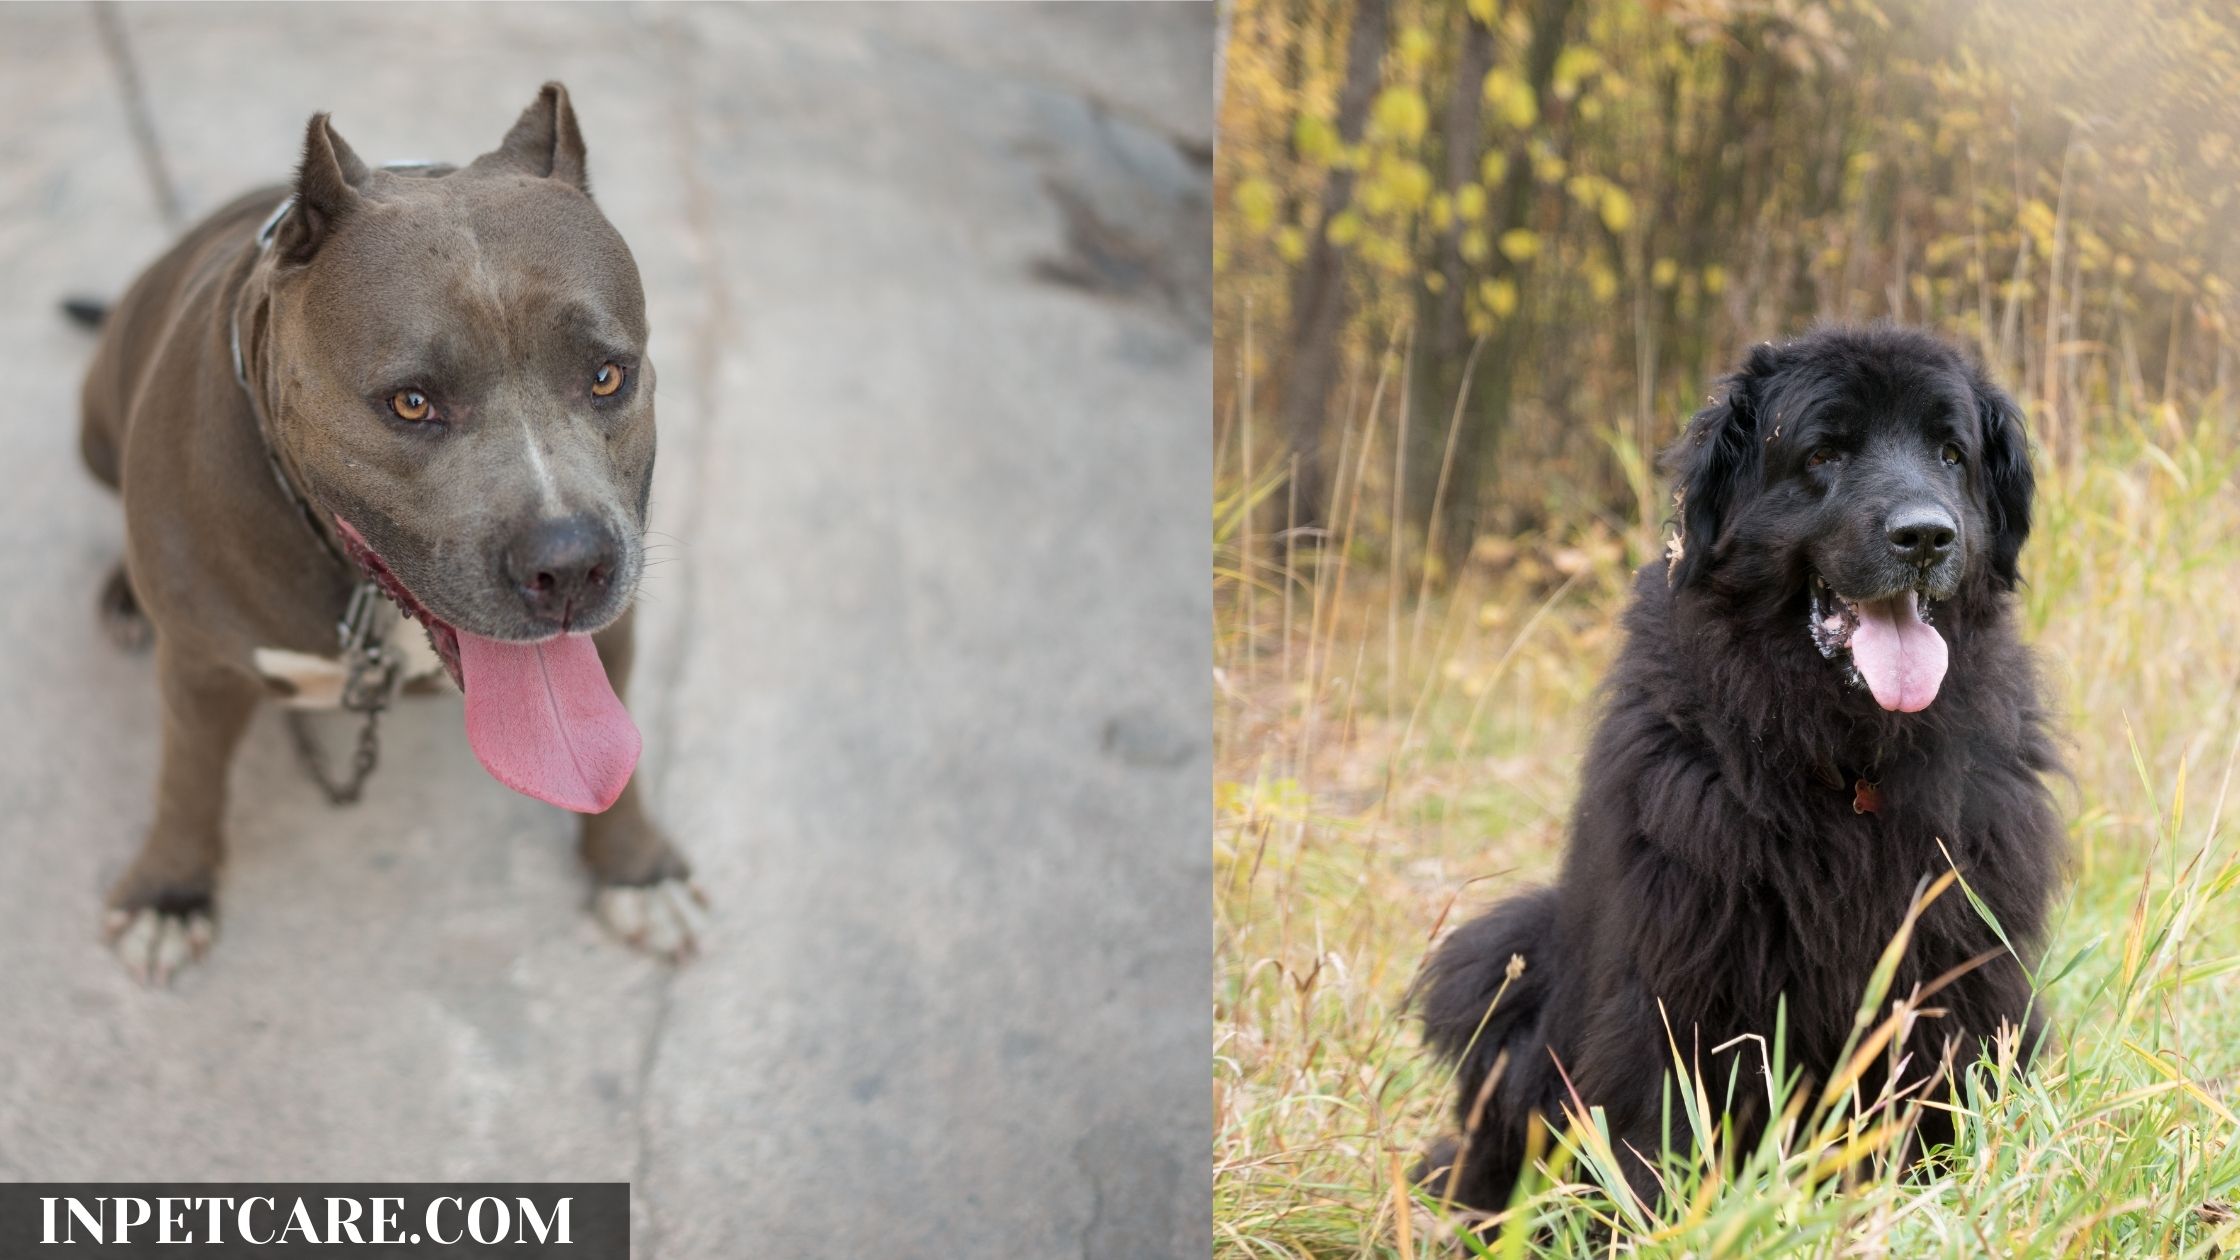 Pitbull Newfoundland Mix: A Complete Guide (With Pictures)